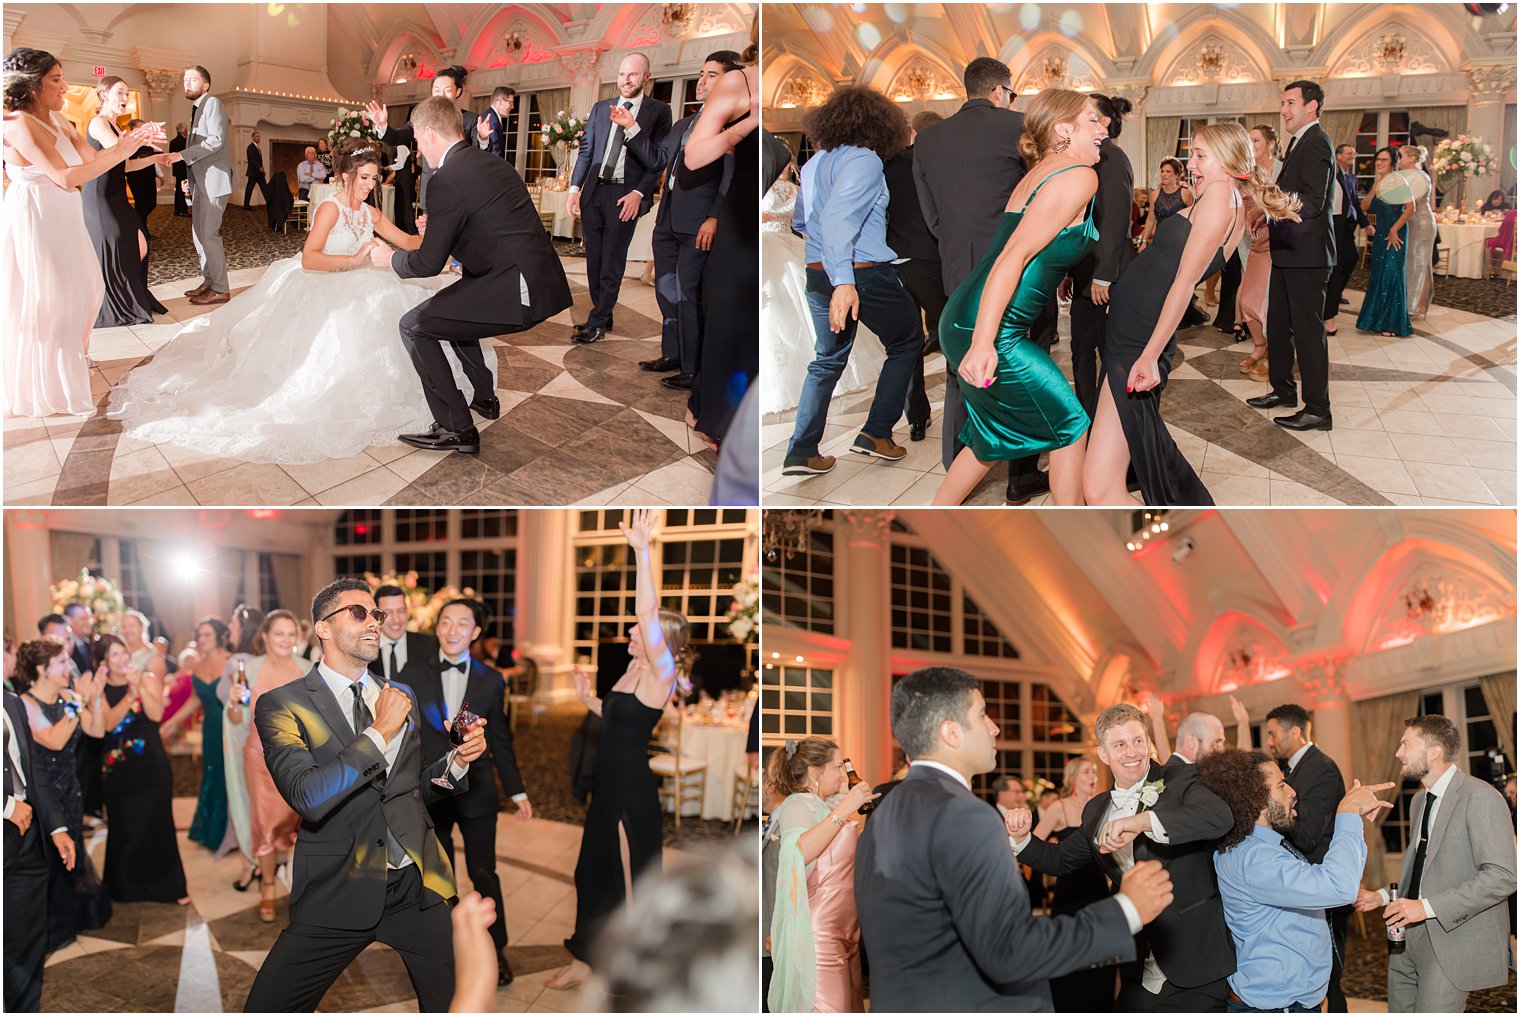 guests dance with newlyweds during Allentown NJ wedding reception